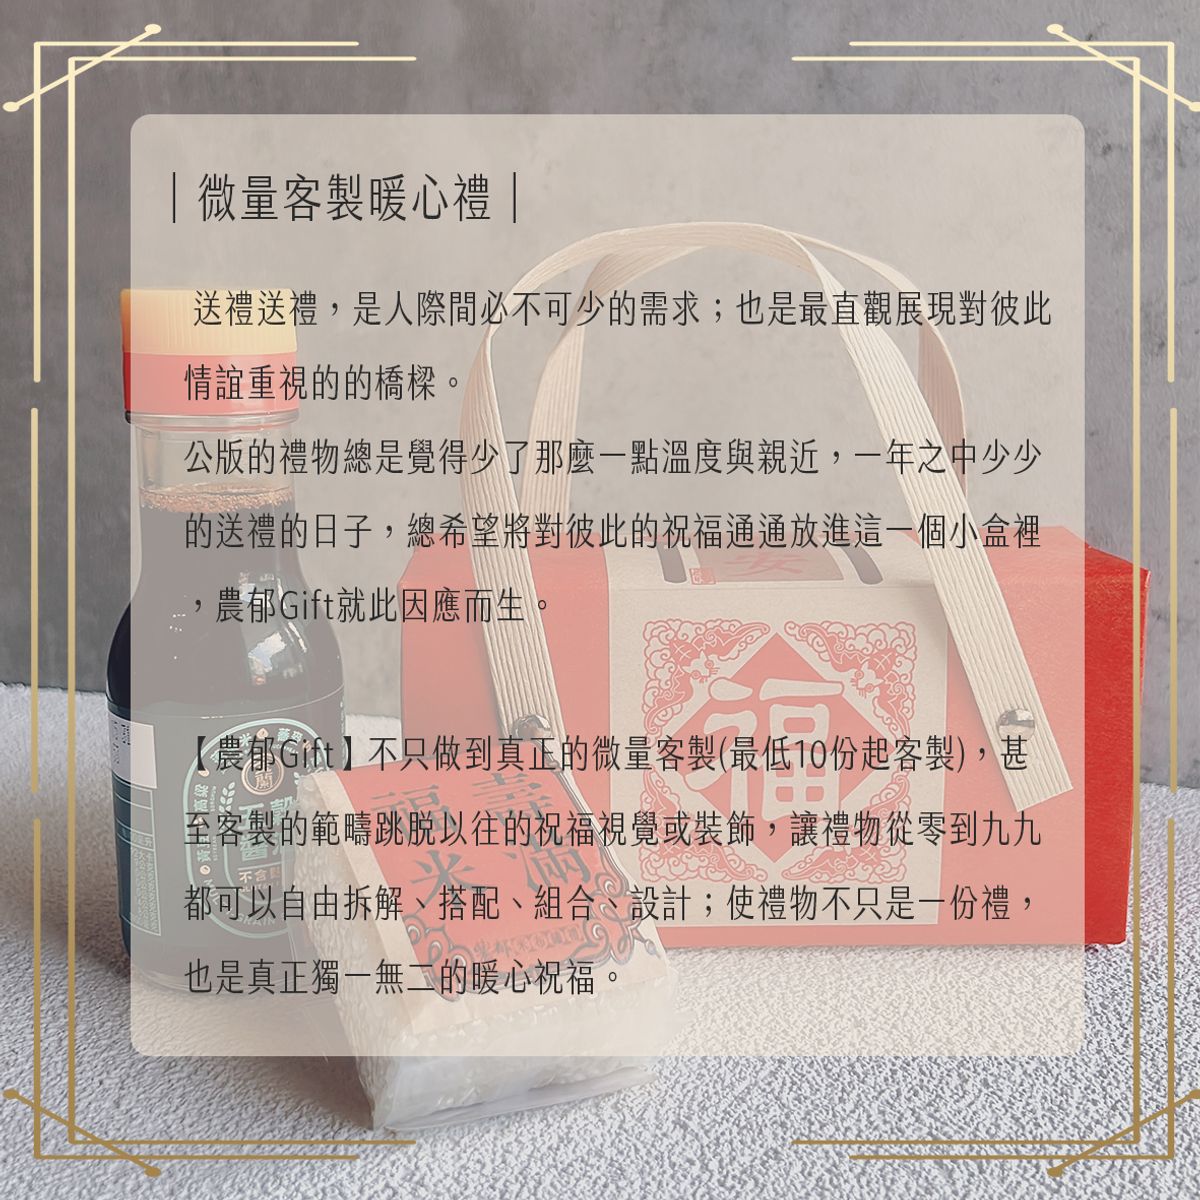 About 禮物